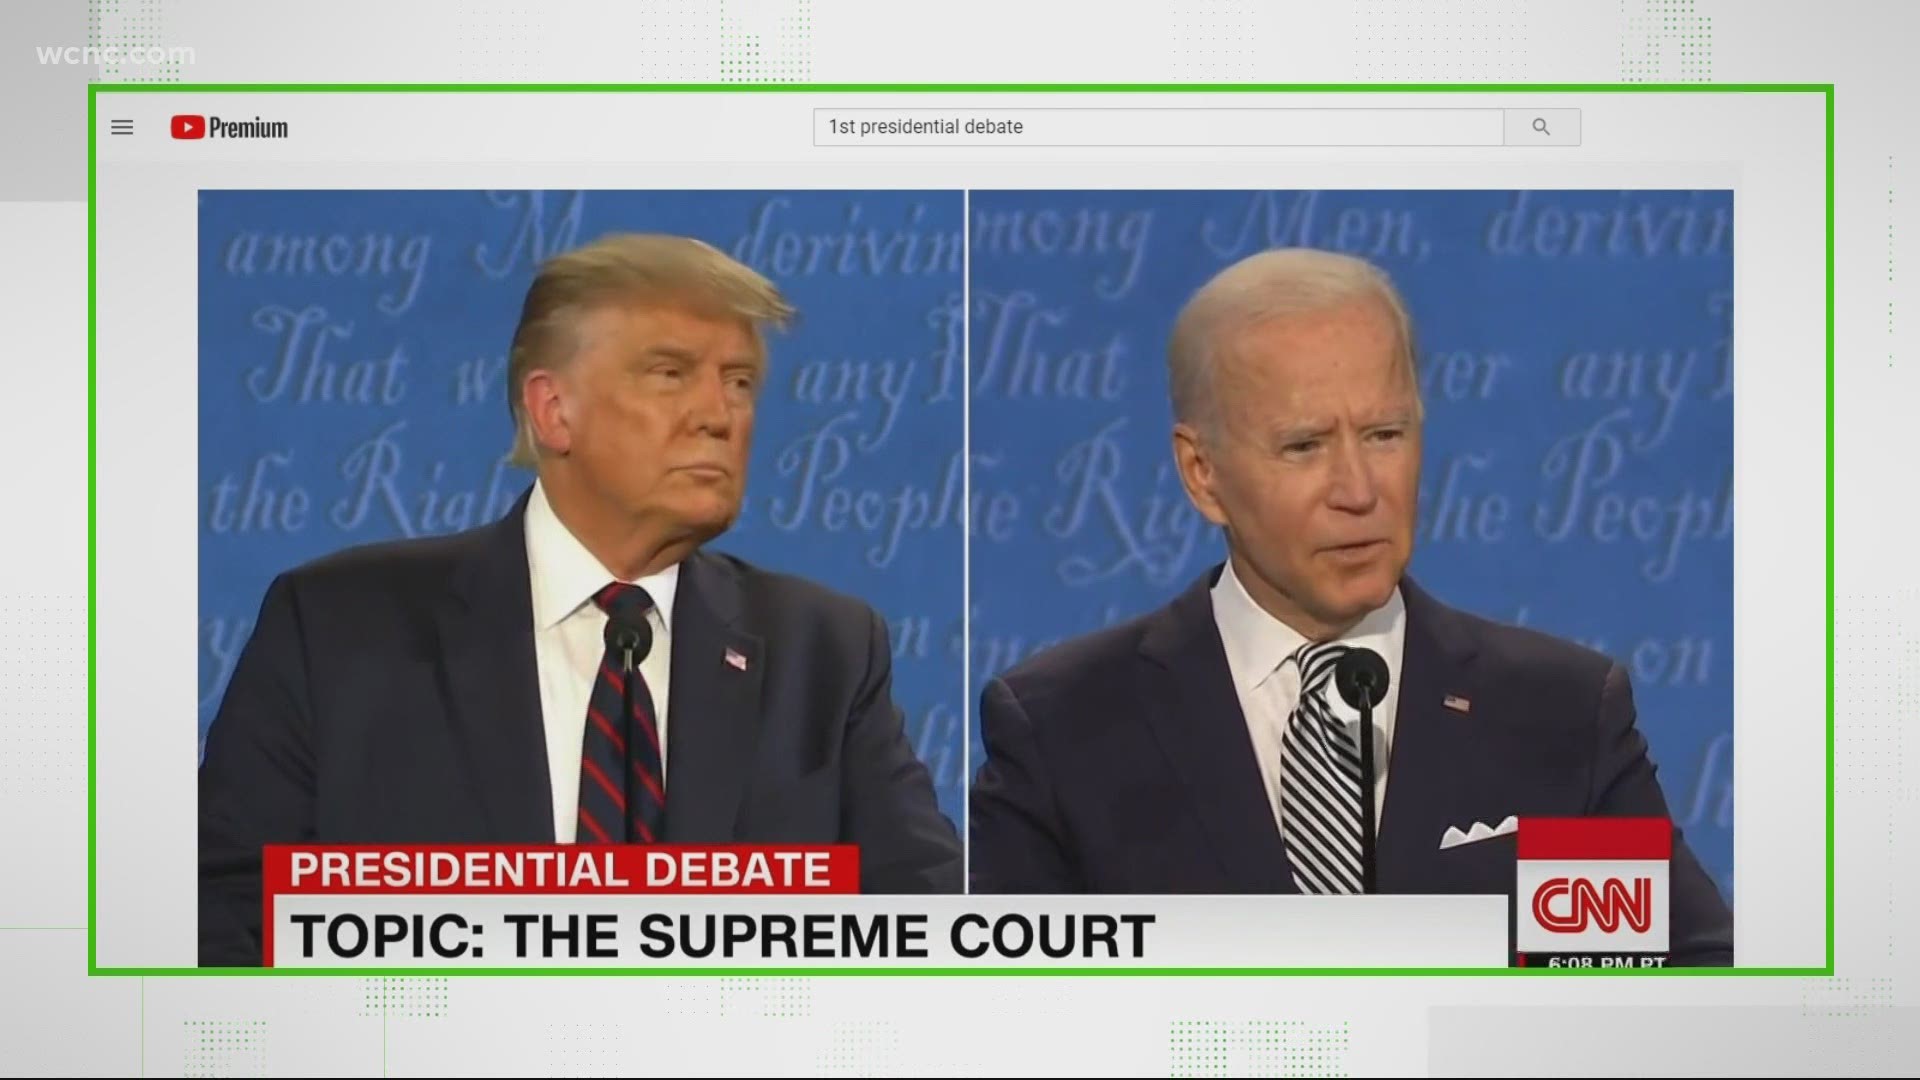 The Verify team fact checks statements made by Donald Trump and Joe Biden during the first presidential debate Tuesday night.